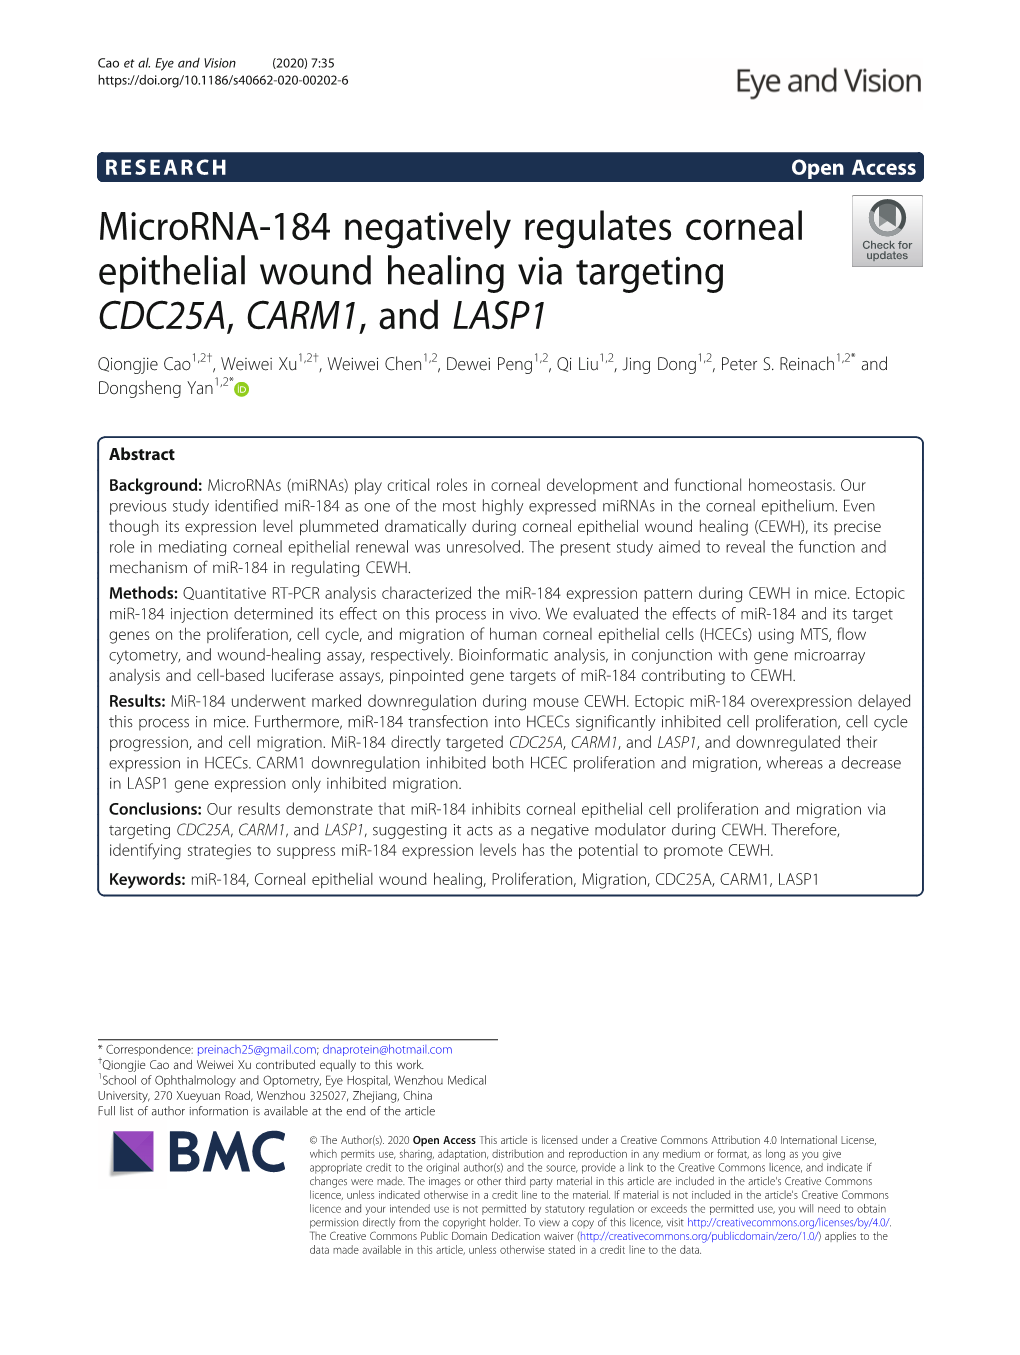 Microrna-184 Negatively Regulates Corneal Epithelial Wound Healing